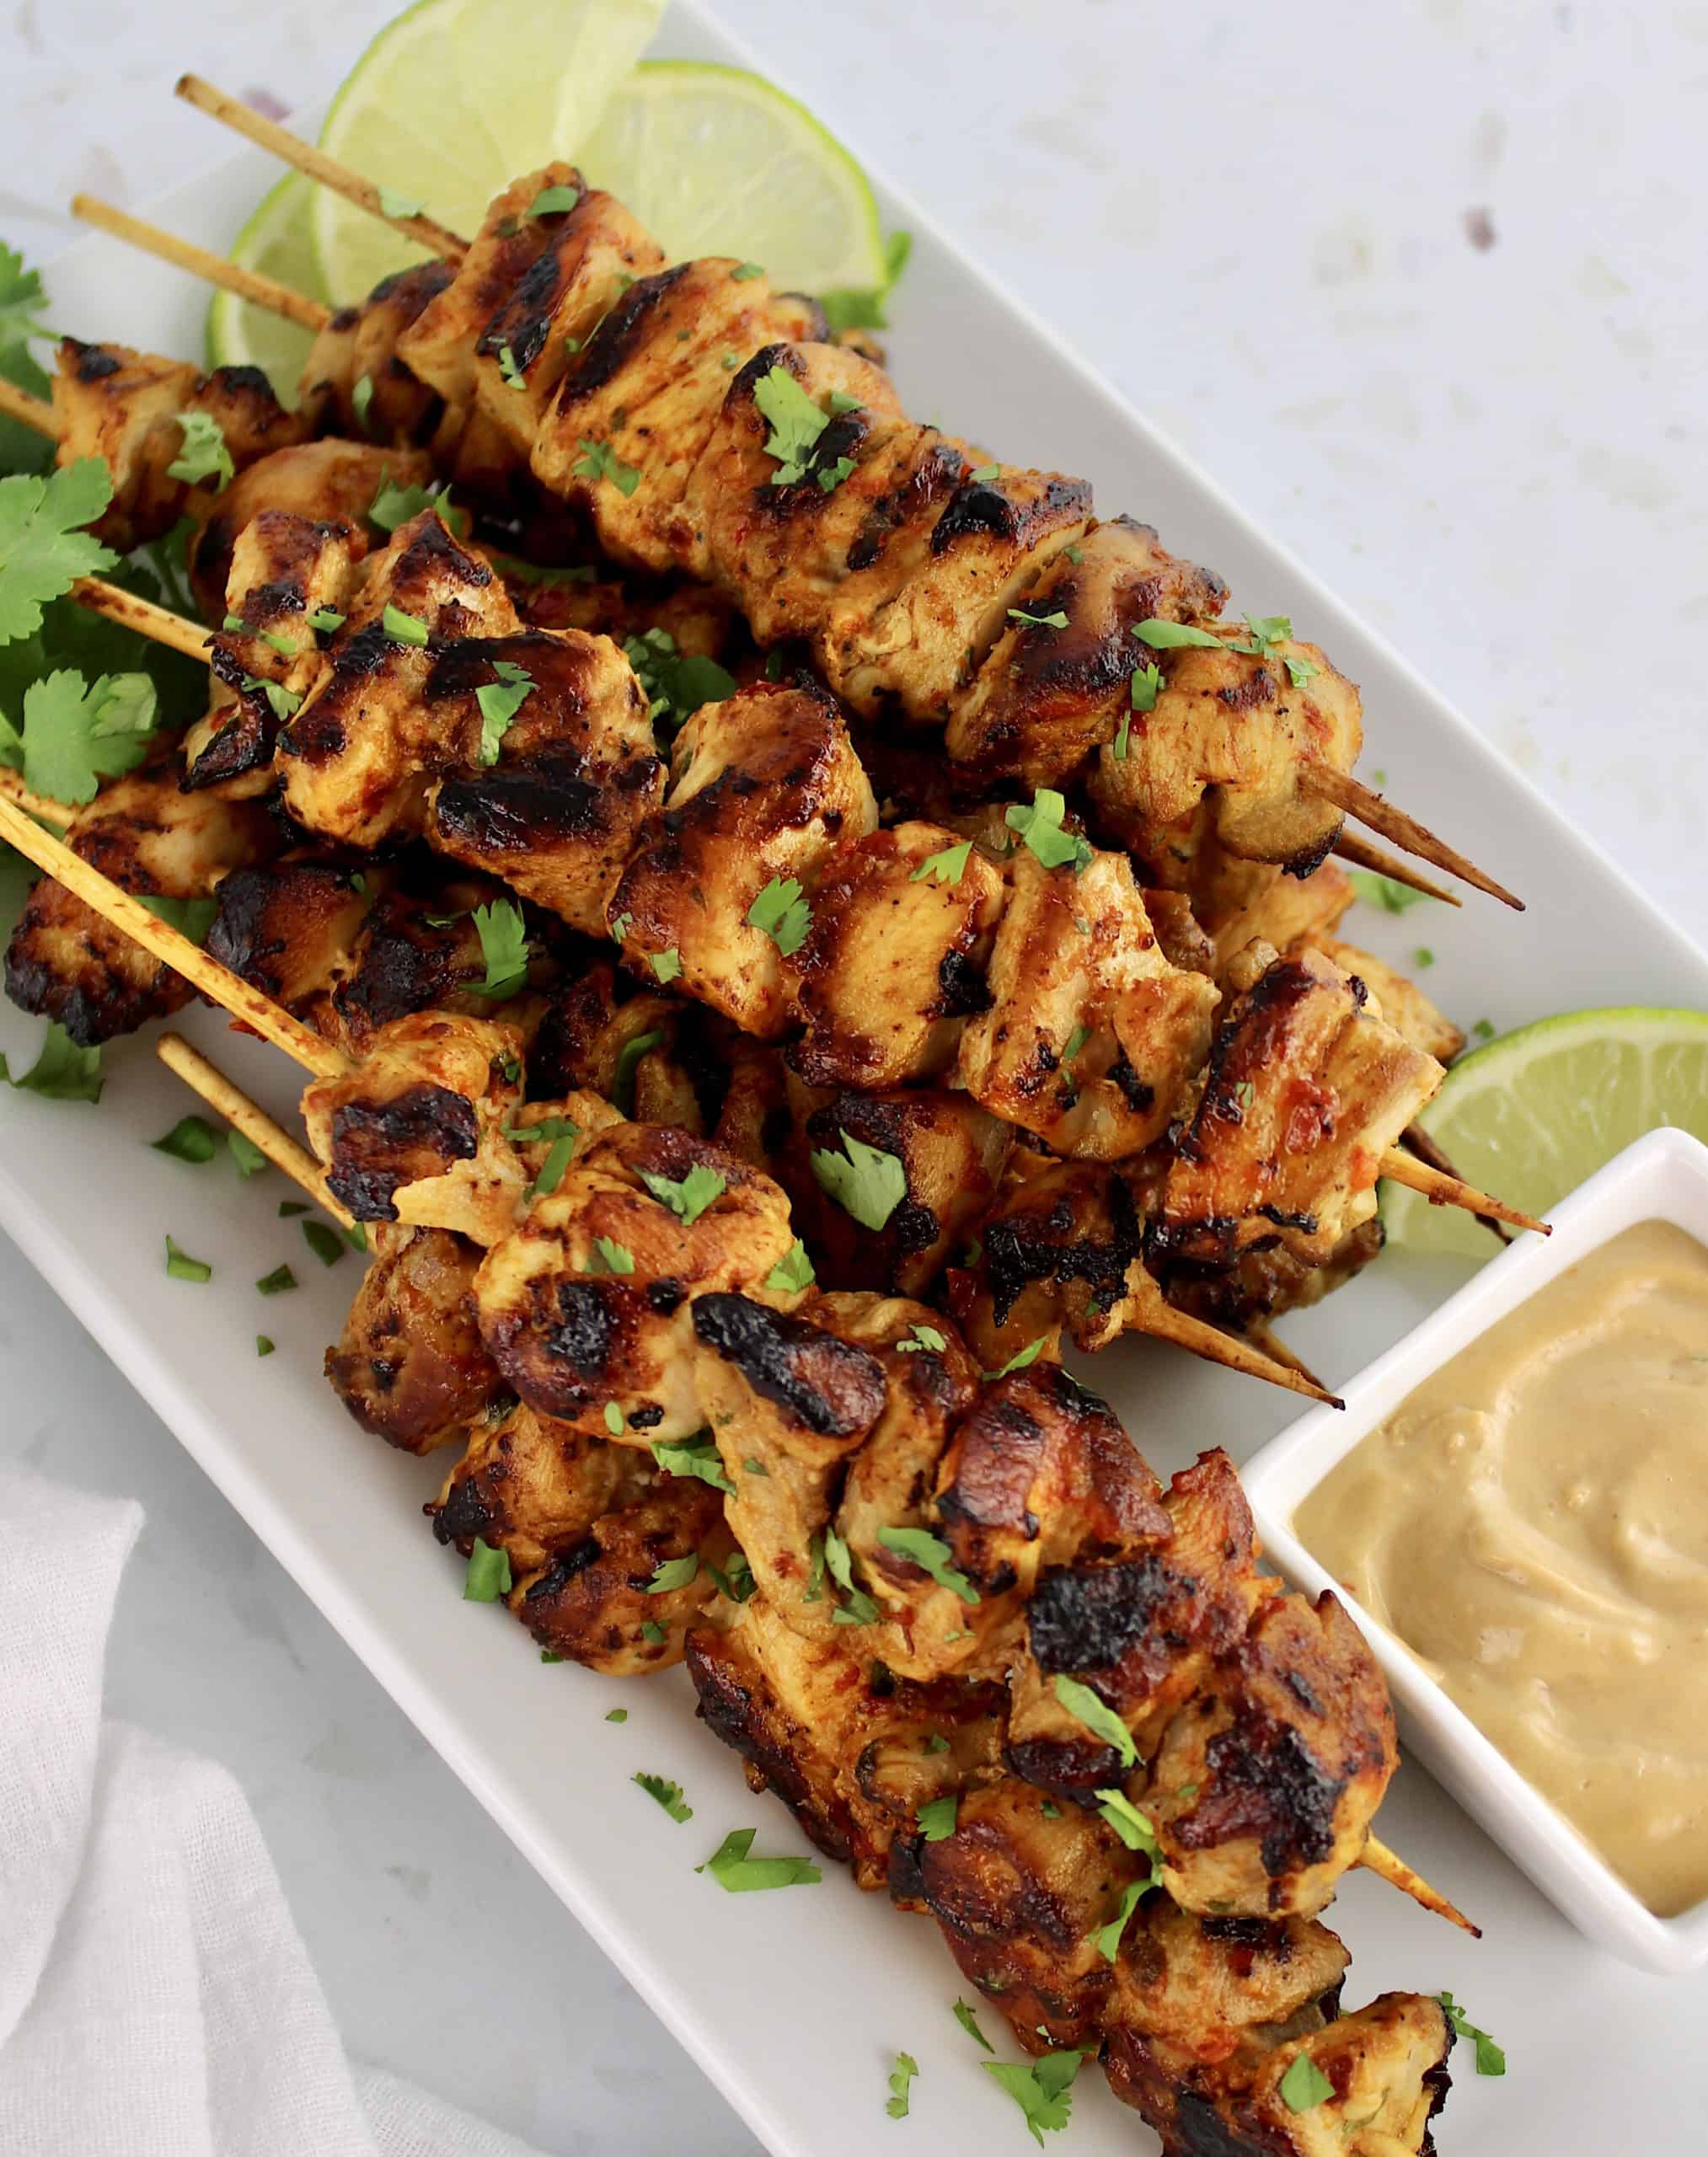 Thai Chicken Satay skewers on white plate with peanut sauce on side